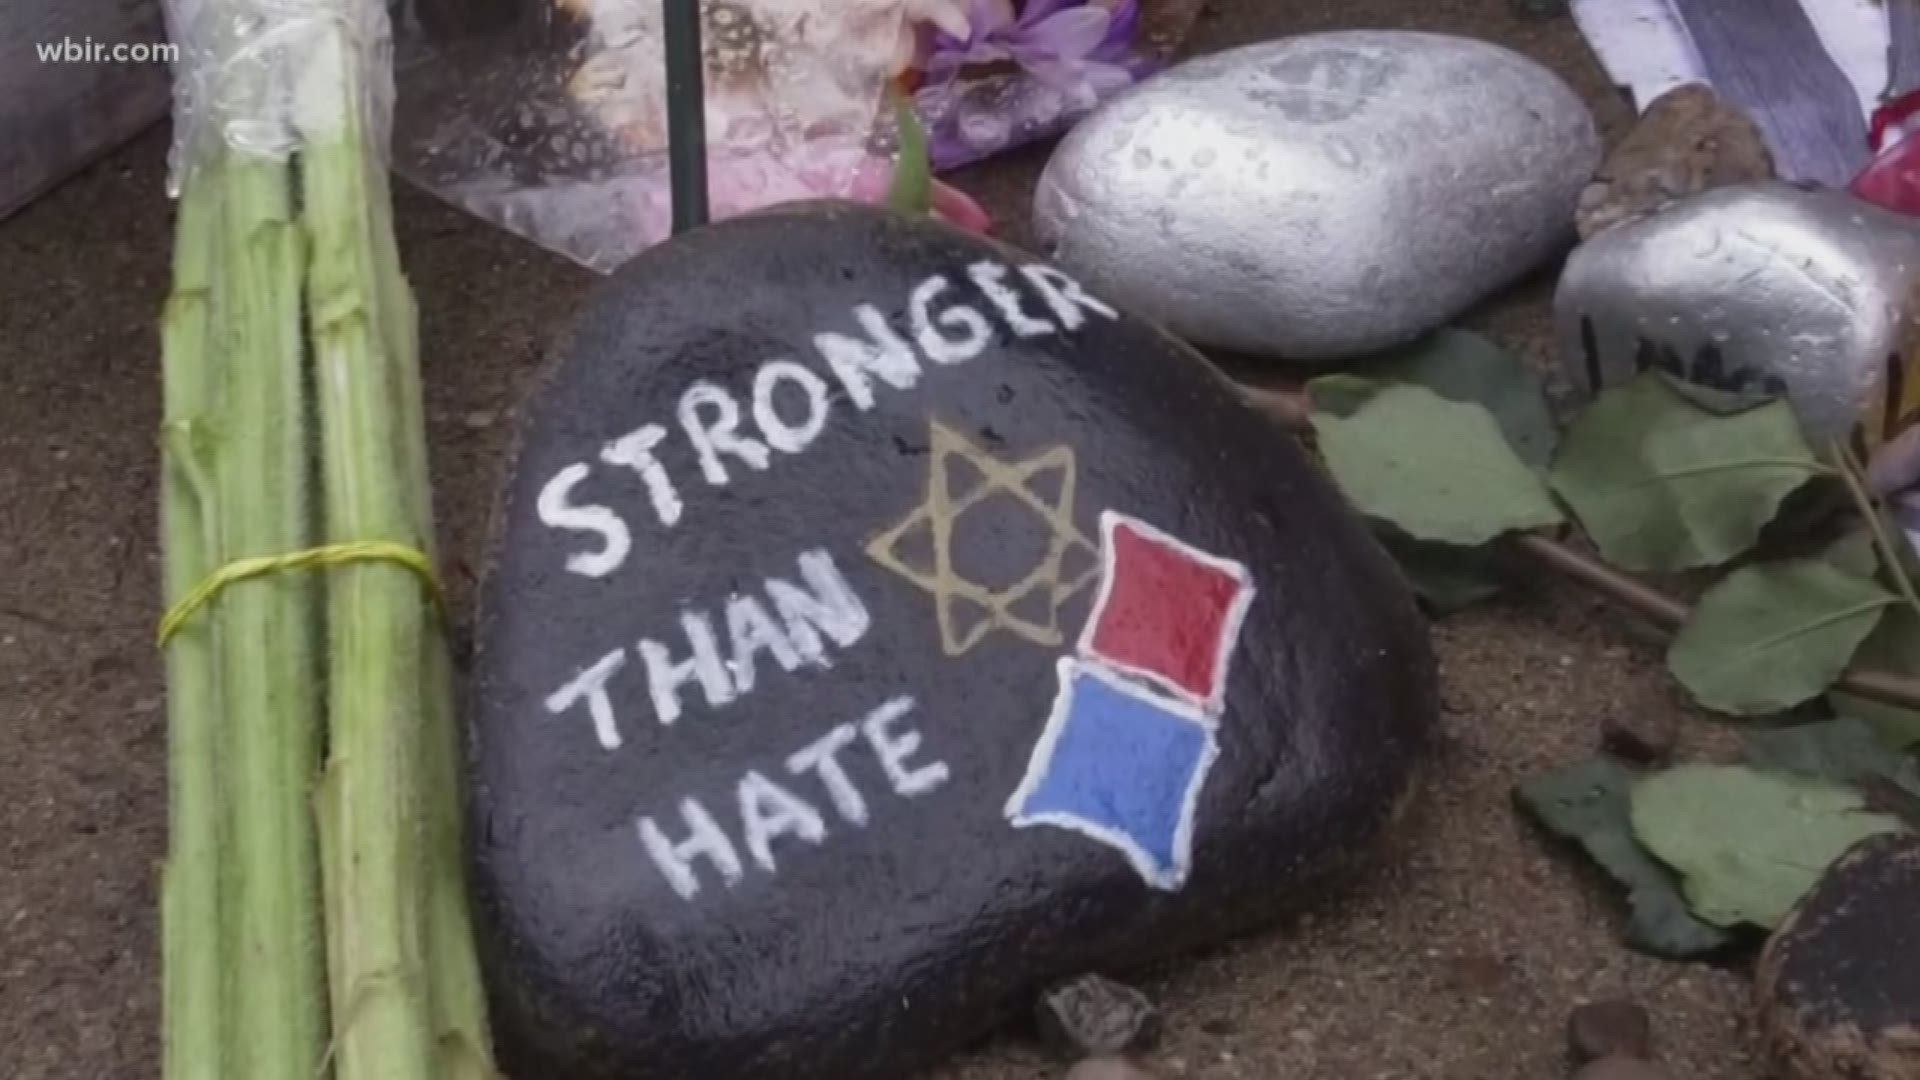 The Anti-Defamation League reports 780 anti-Semitic incidents so far in 2019. That is according to FBI data.